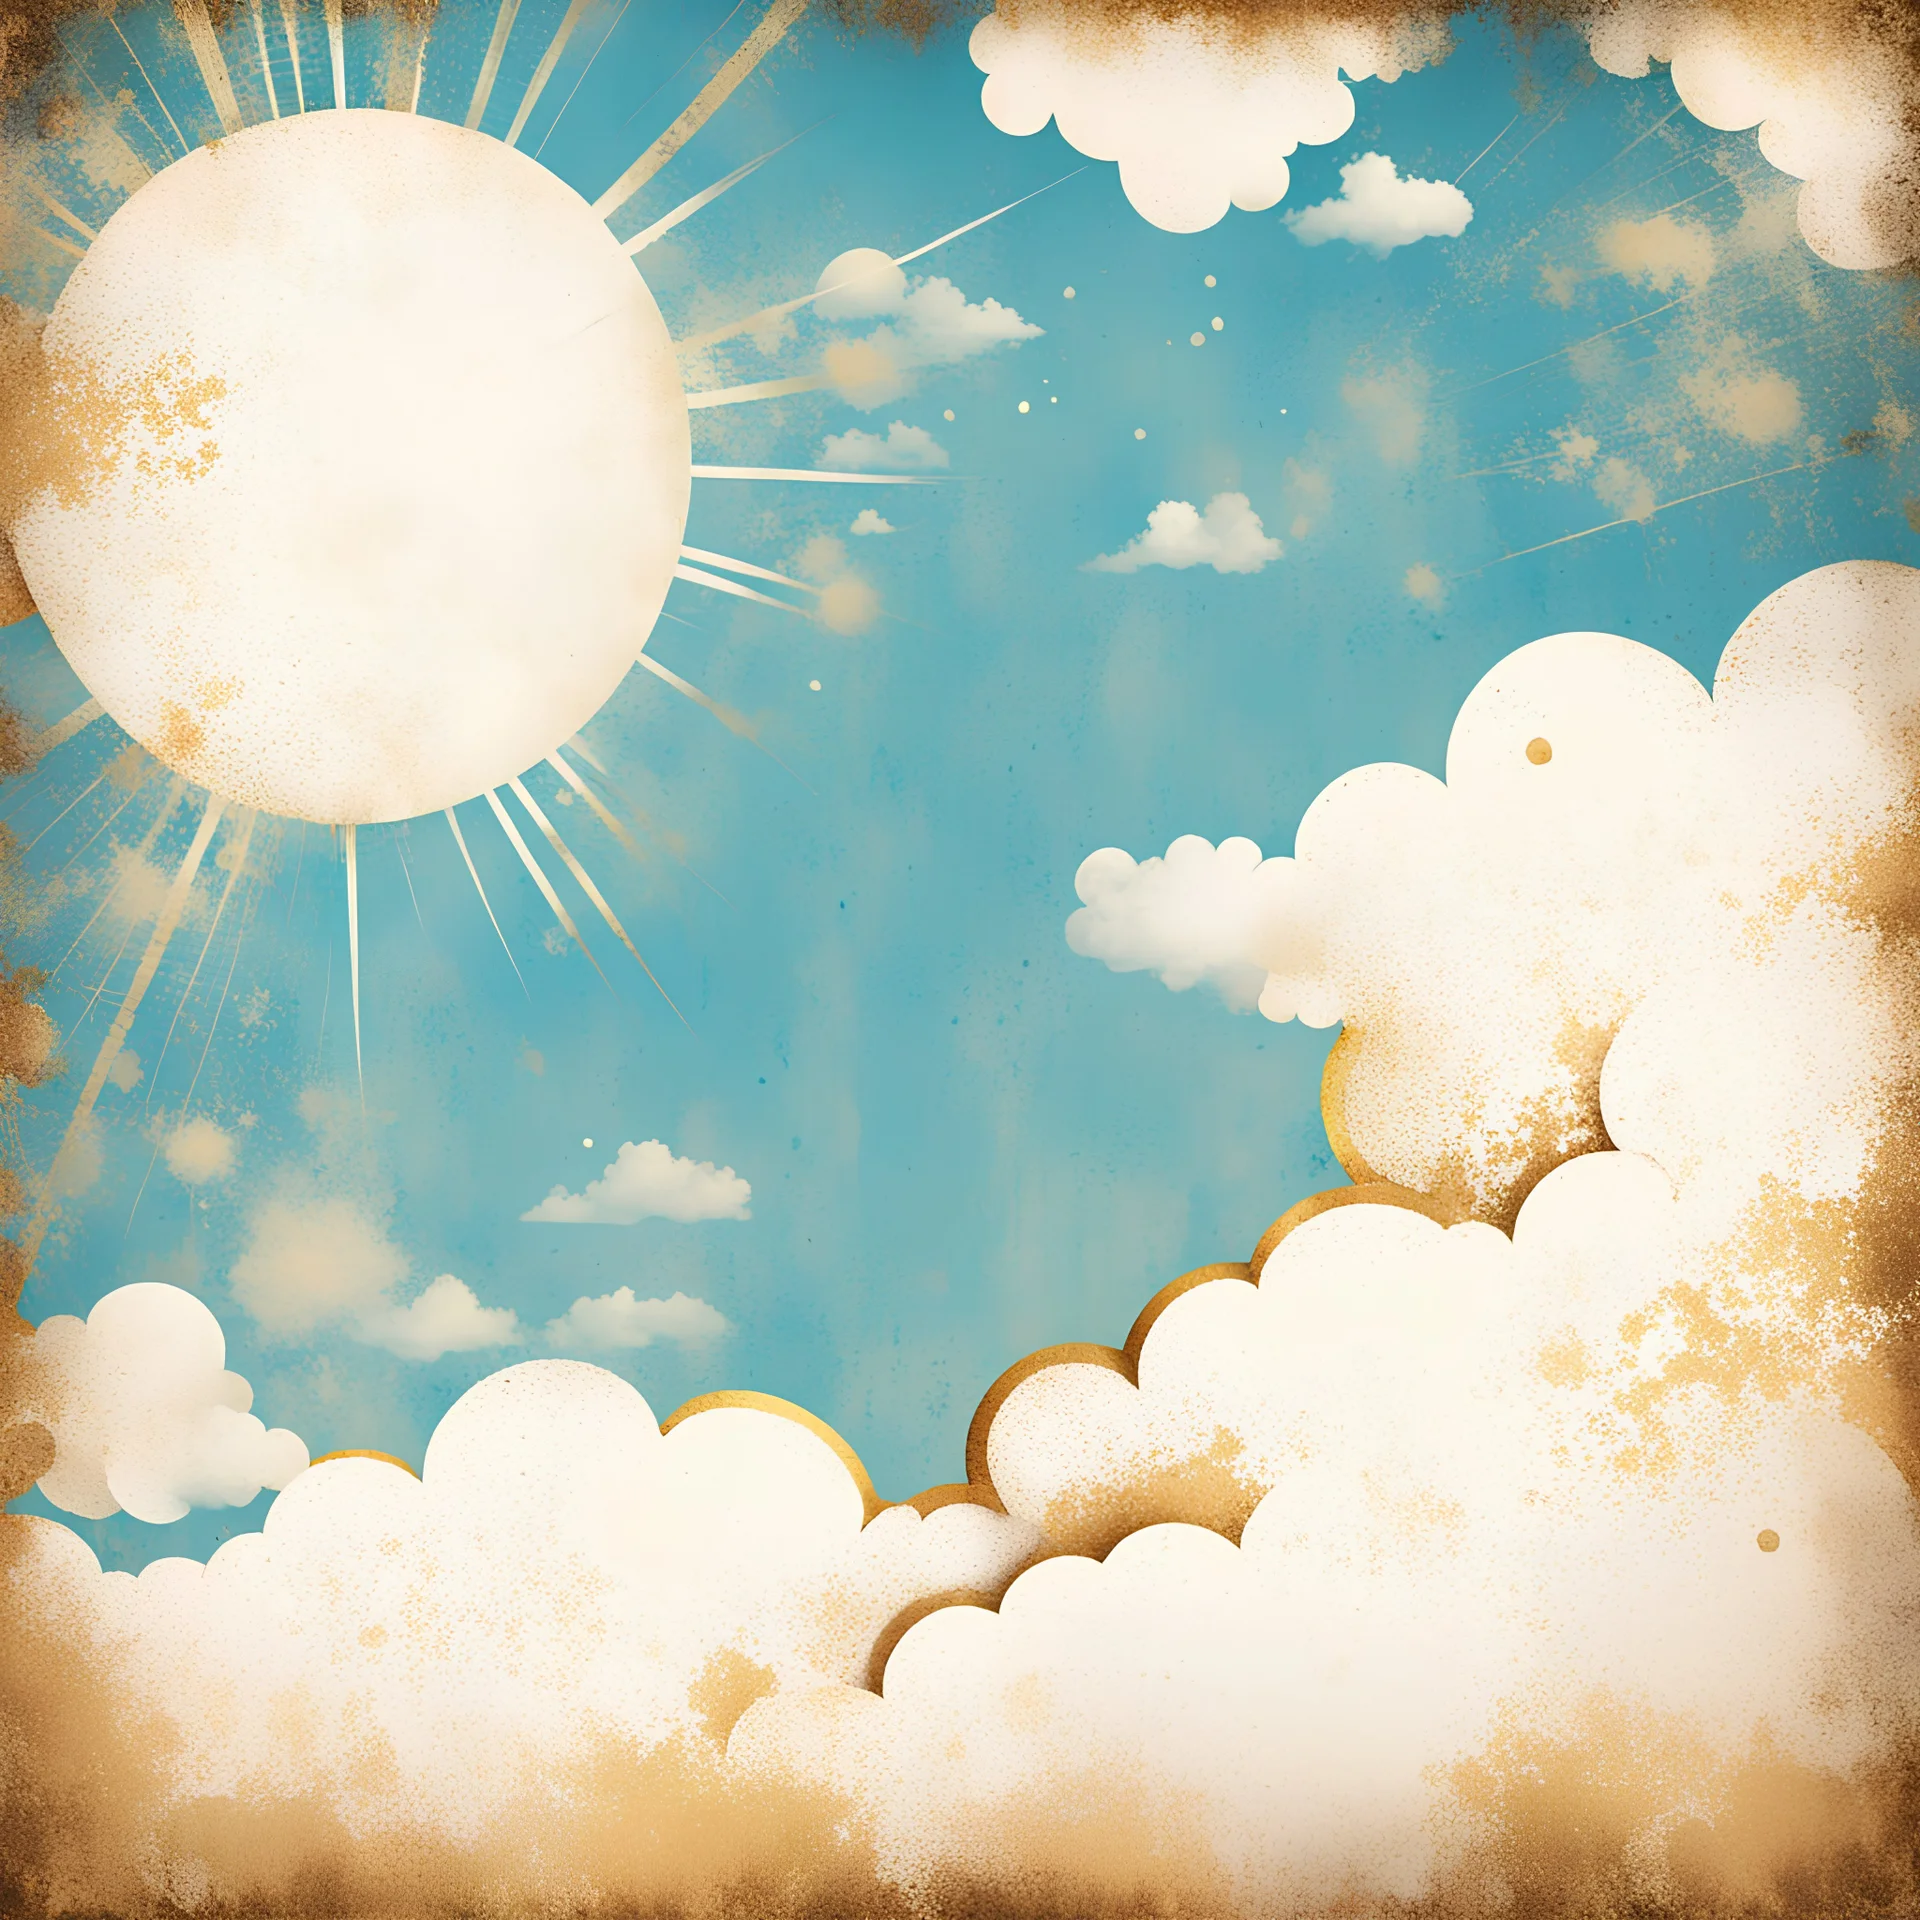 Hyper Realistic Sky-Blue, White & Golden Retro-&-Groovy-Grungy-Rustic-Background